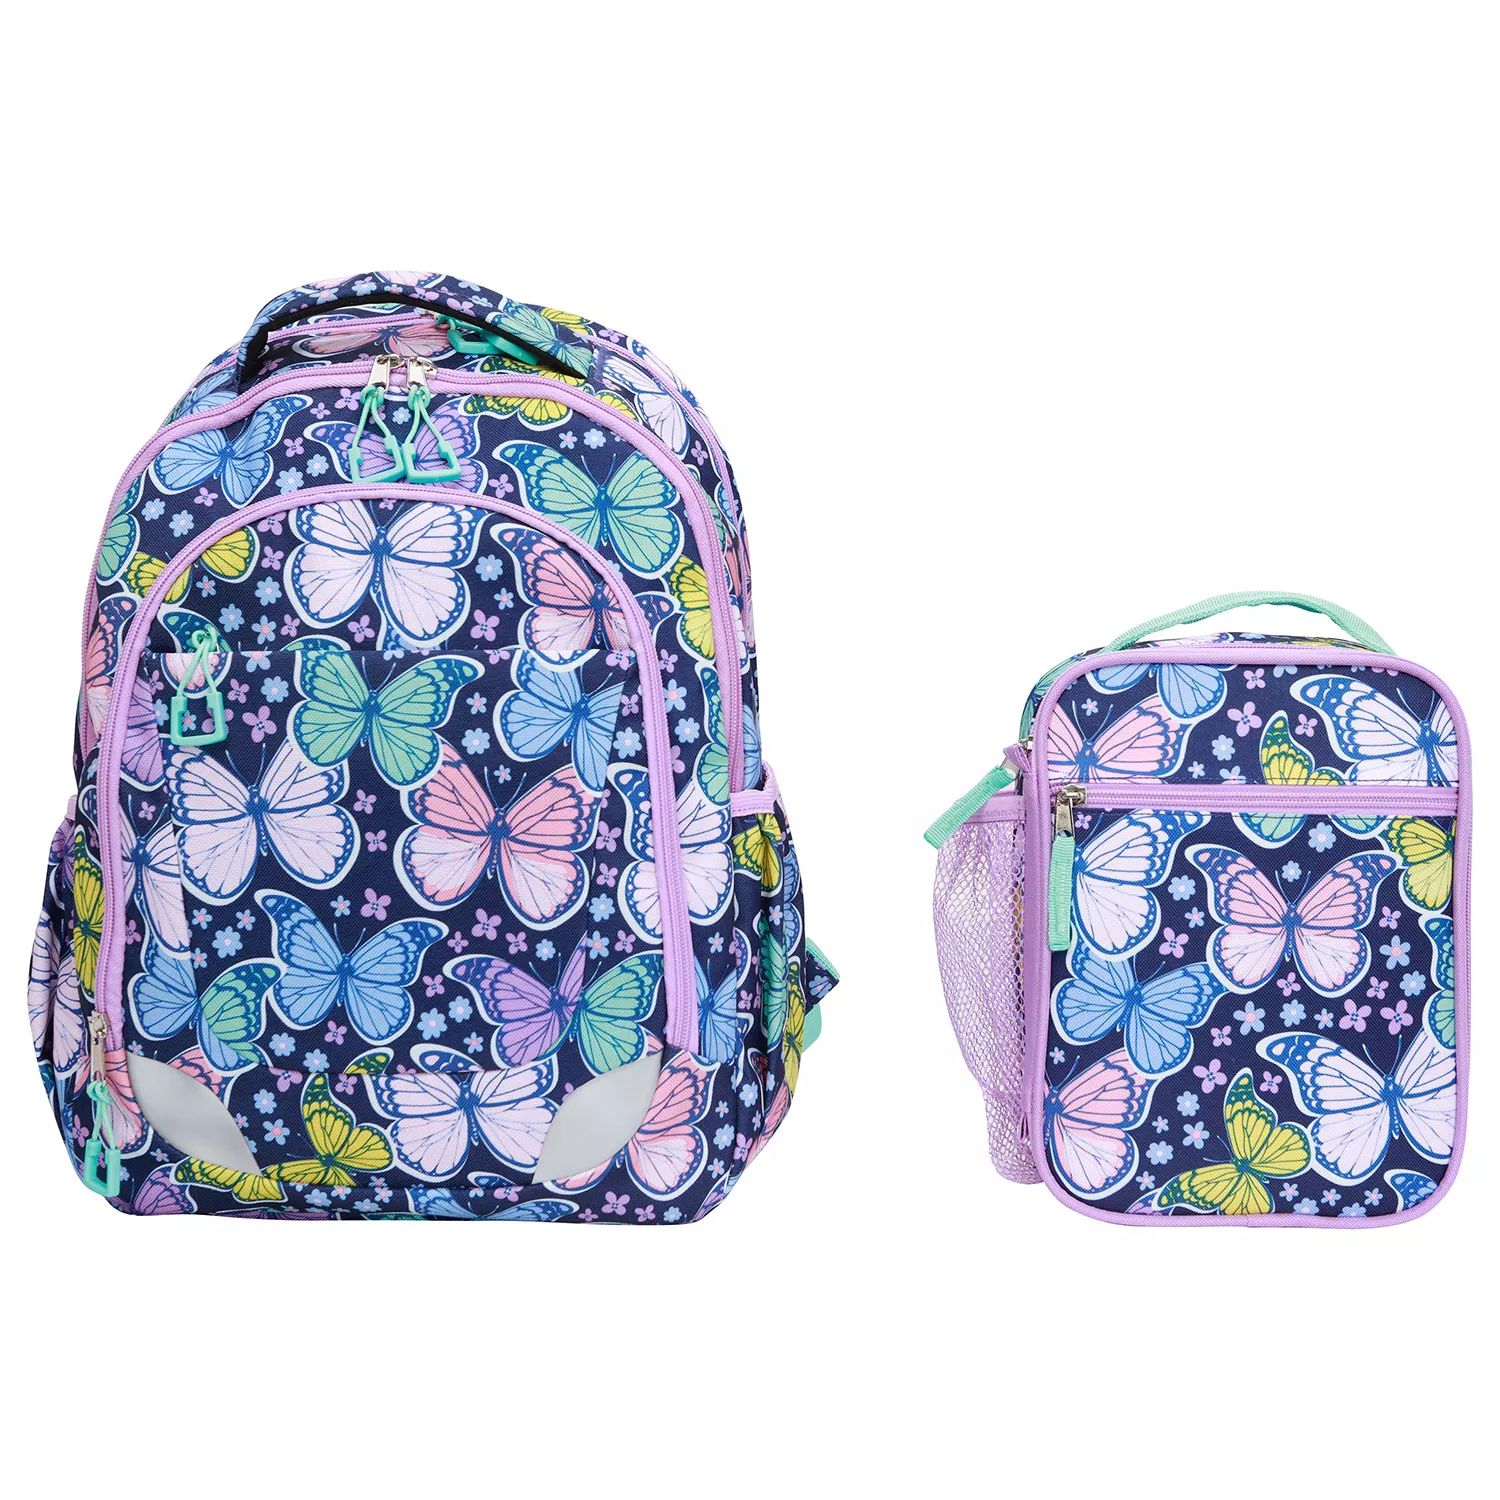 Member's Mark 2-Piece Backpack Set with Matching Lunch Kit, Choose a Design | Sam's Club